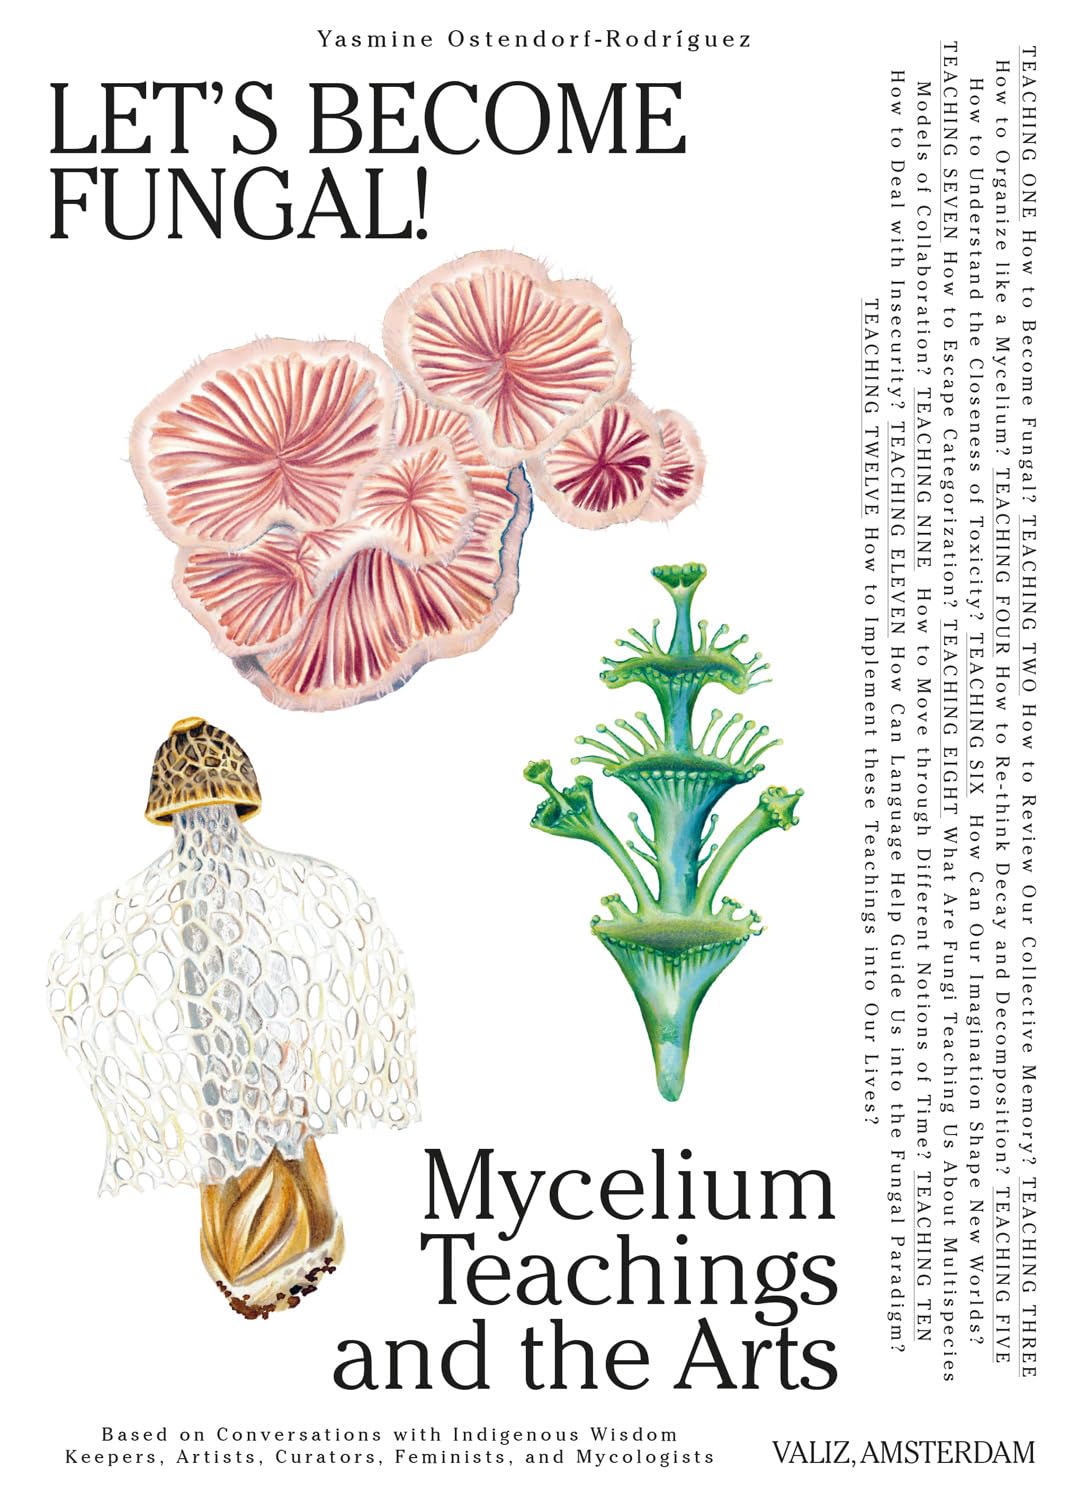 Twelve lessons in fungal activism, Indigenous knowledge and collaboration for artists, gardeners, educators and anyone intrigued by the fascinating life and inspiring metaphors of the mycelium and the mushroom.